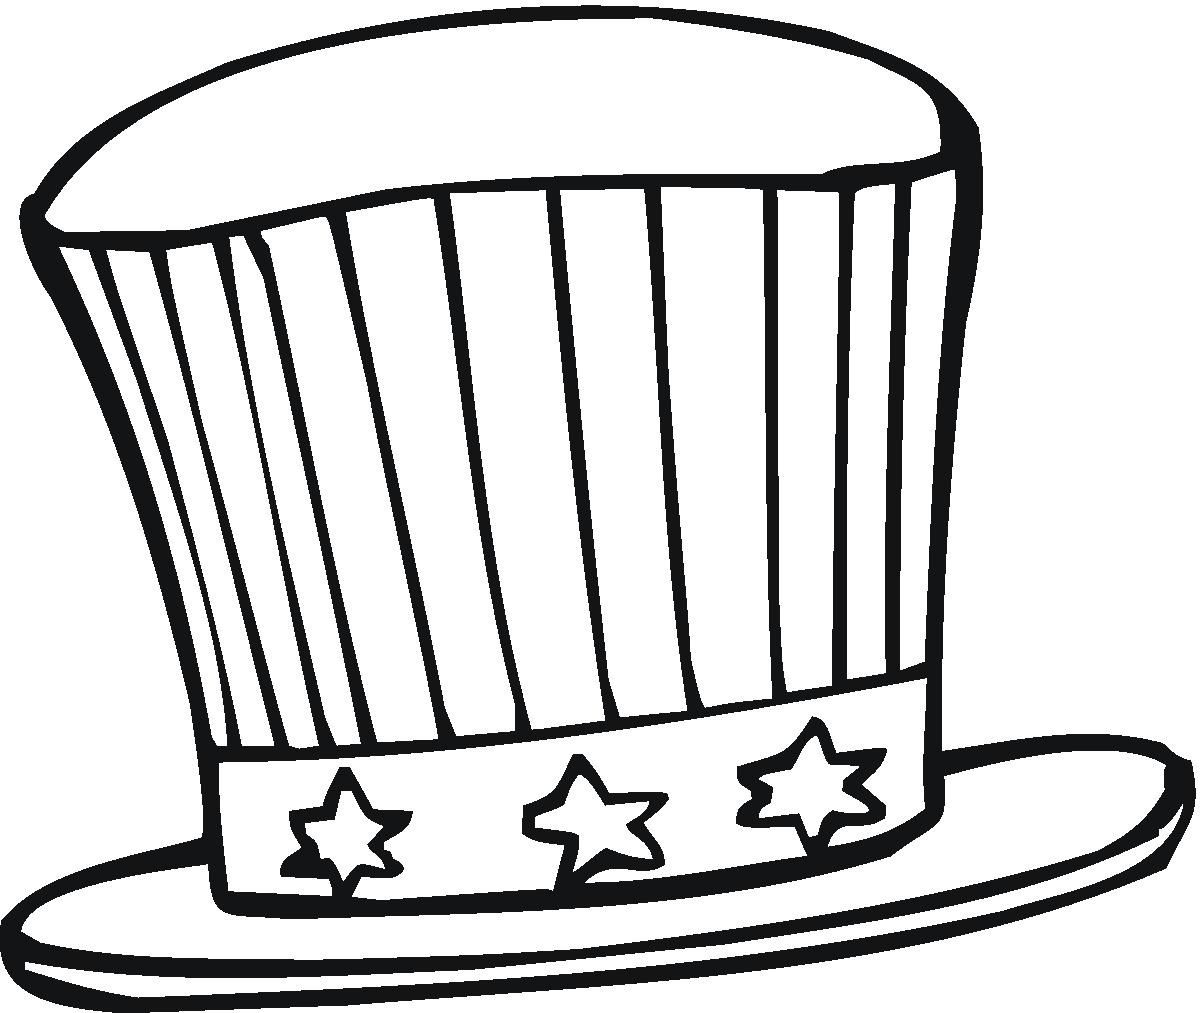 Top Hat Coloring Page - Coloring Pages for Kids and for Adults